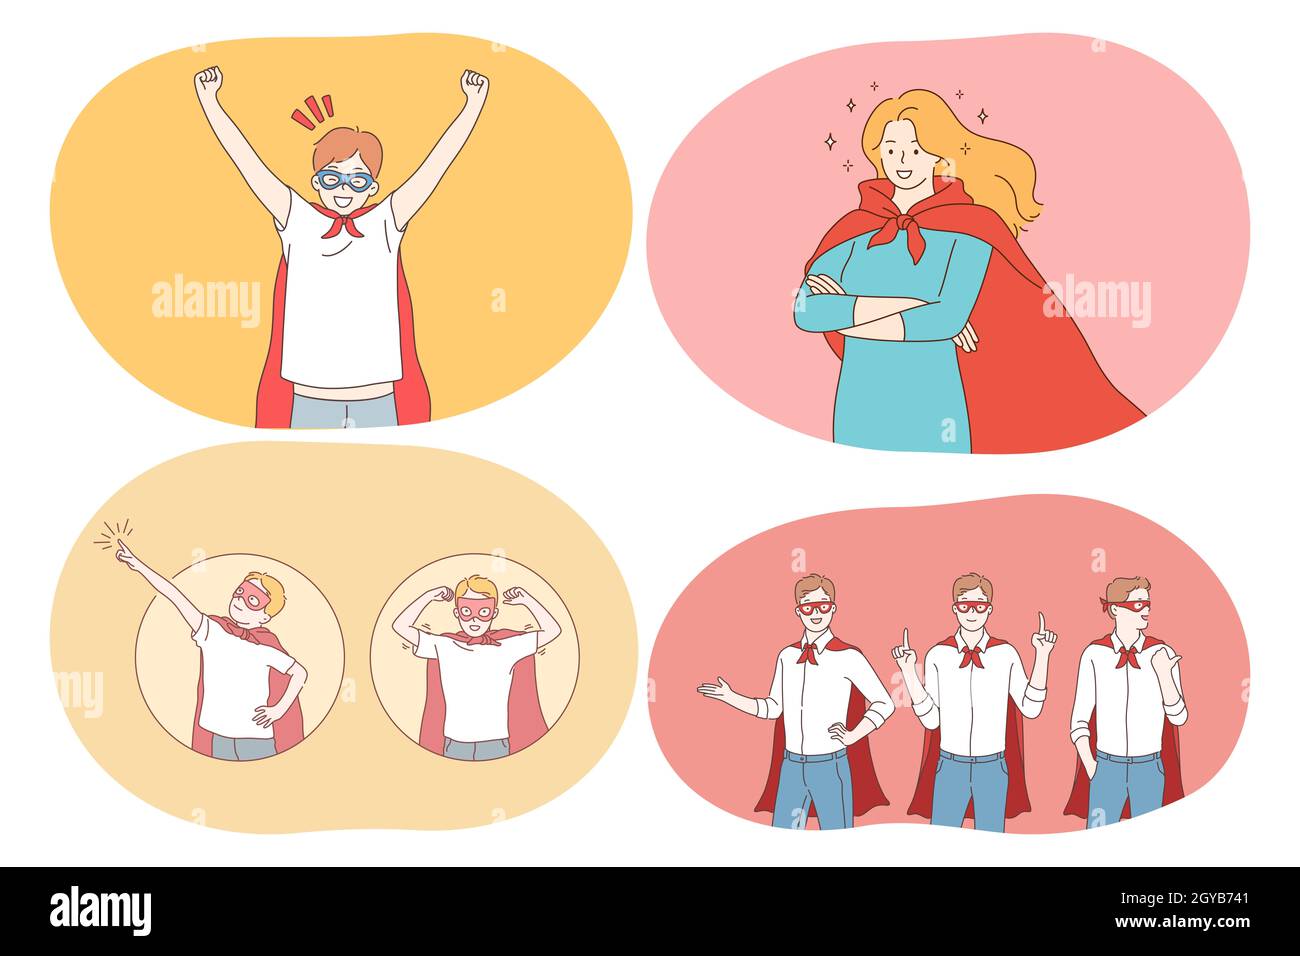 Superhero, superman, power, strength, confidence concept. Young positive people cartoon characters in superman costume mantle and mask imagining power Stock Photo